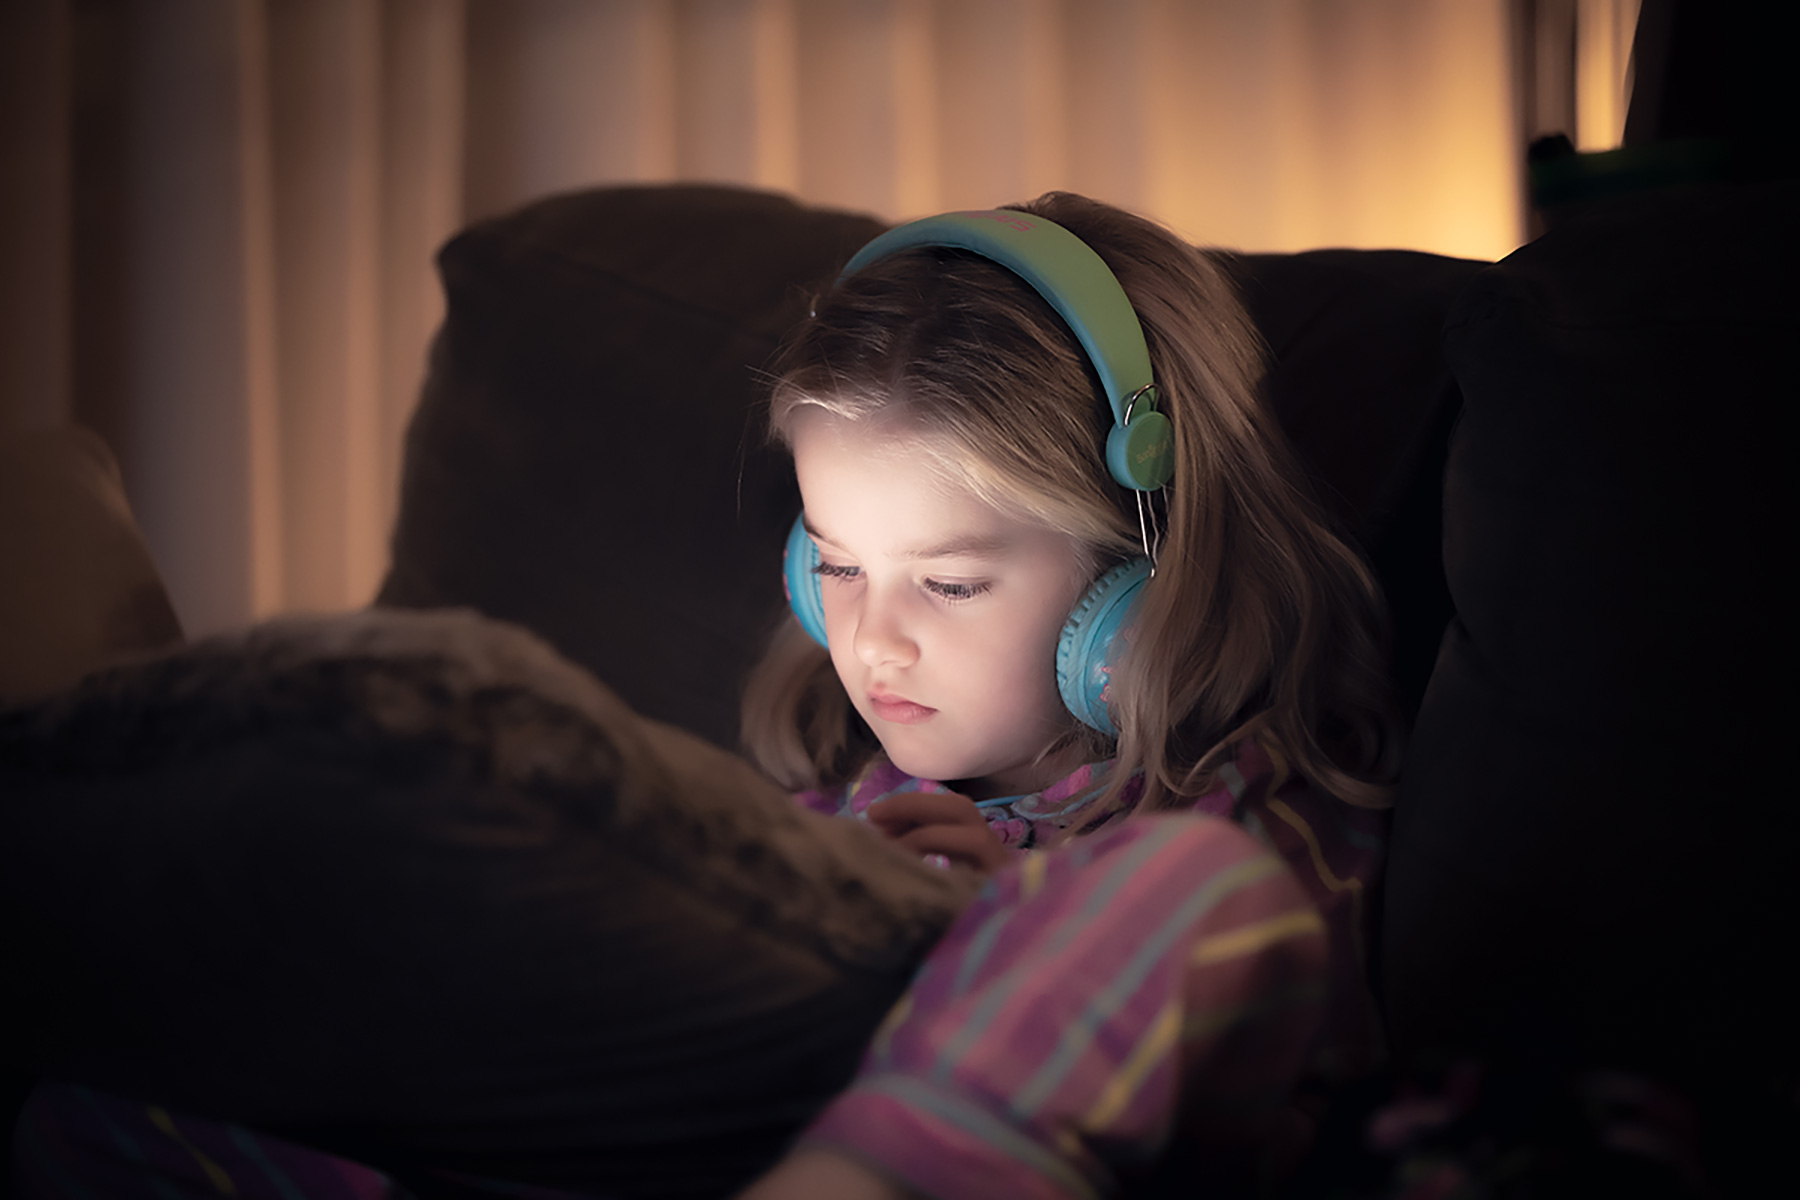 Children's screen time and links to sleep, language and cognitive development